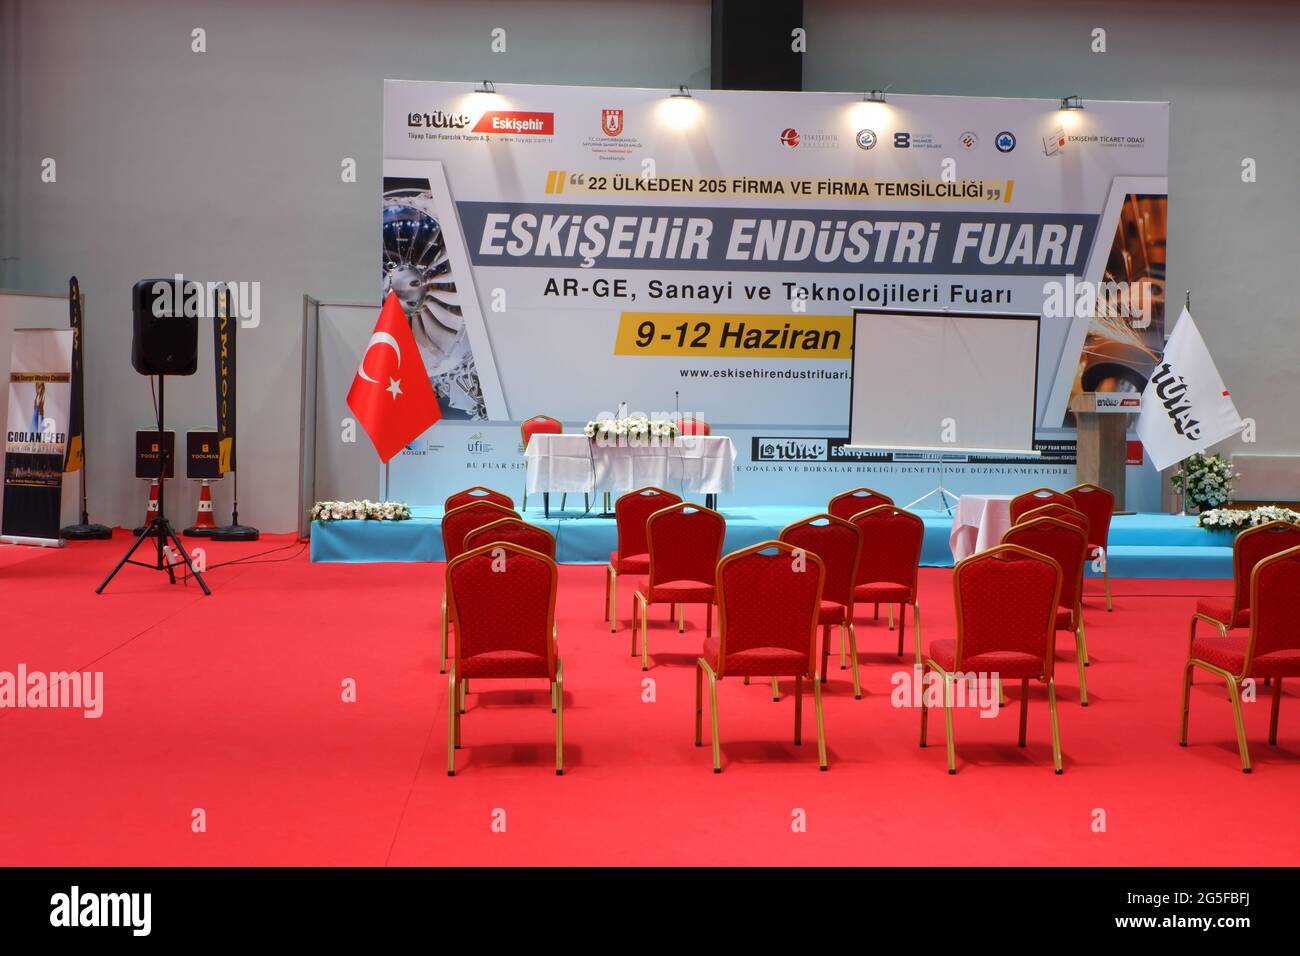 Conference Hall at Eskisehir Industrial Fair in Turkey Stock Photo